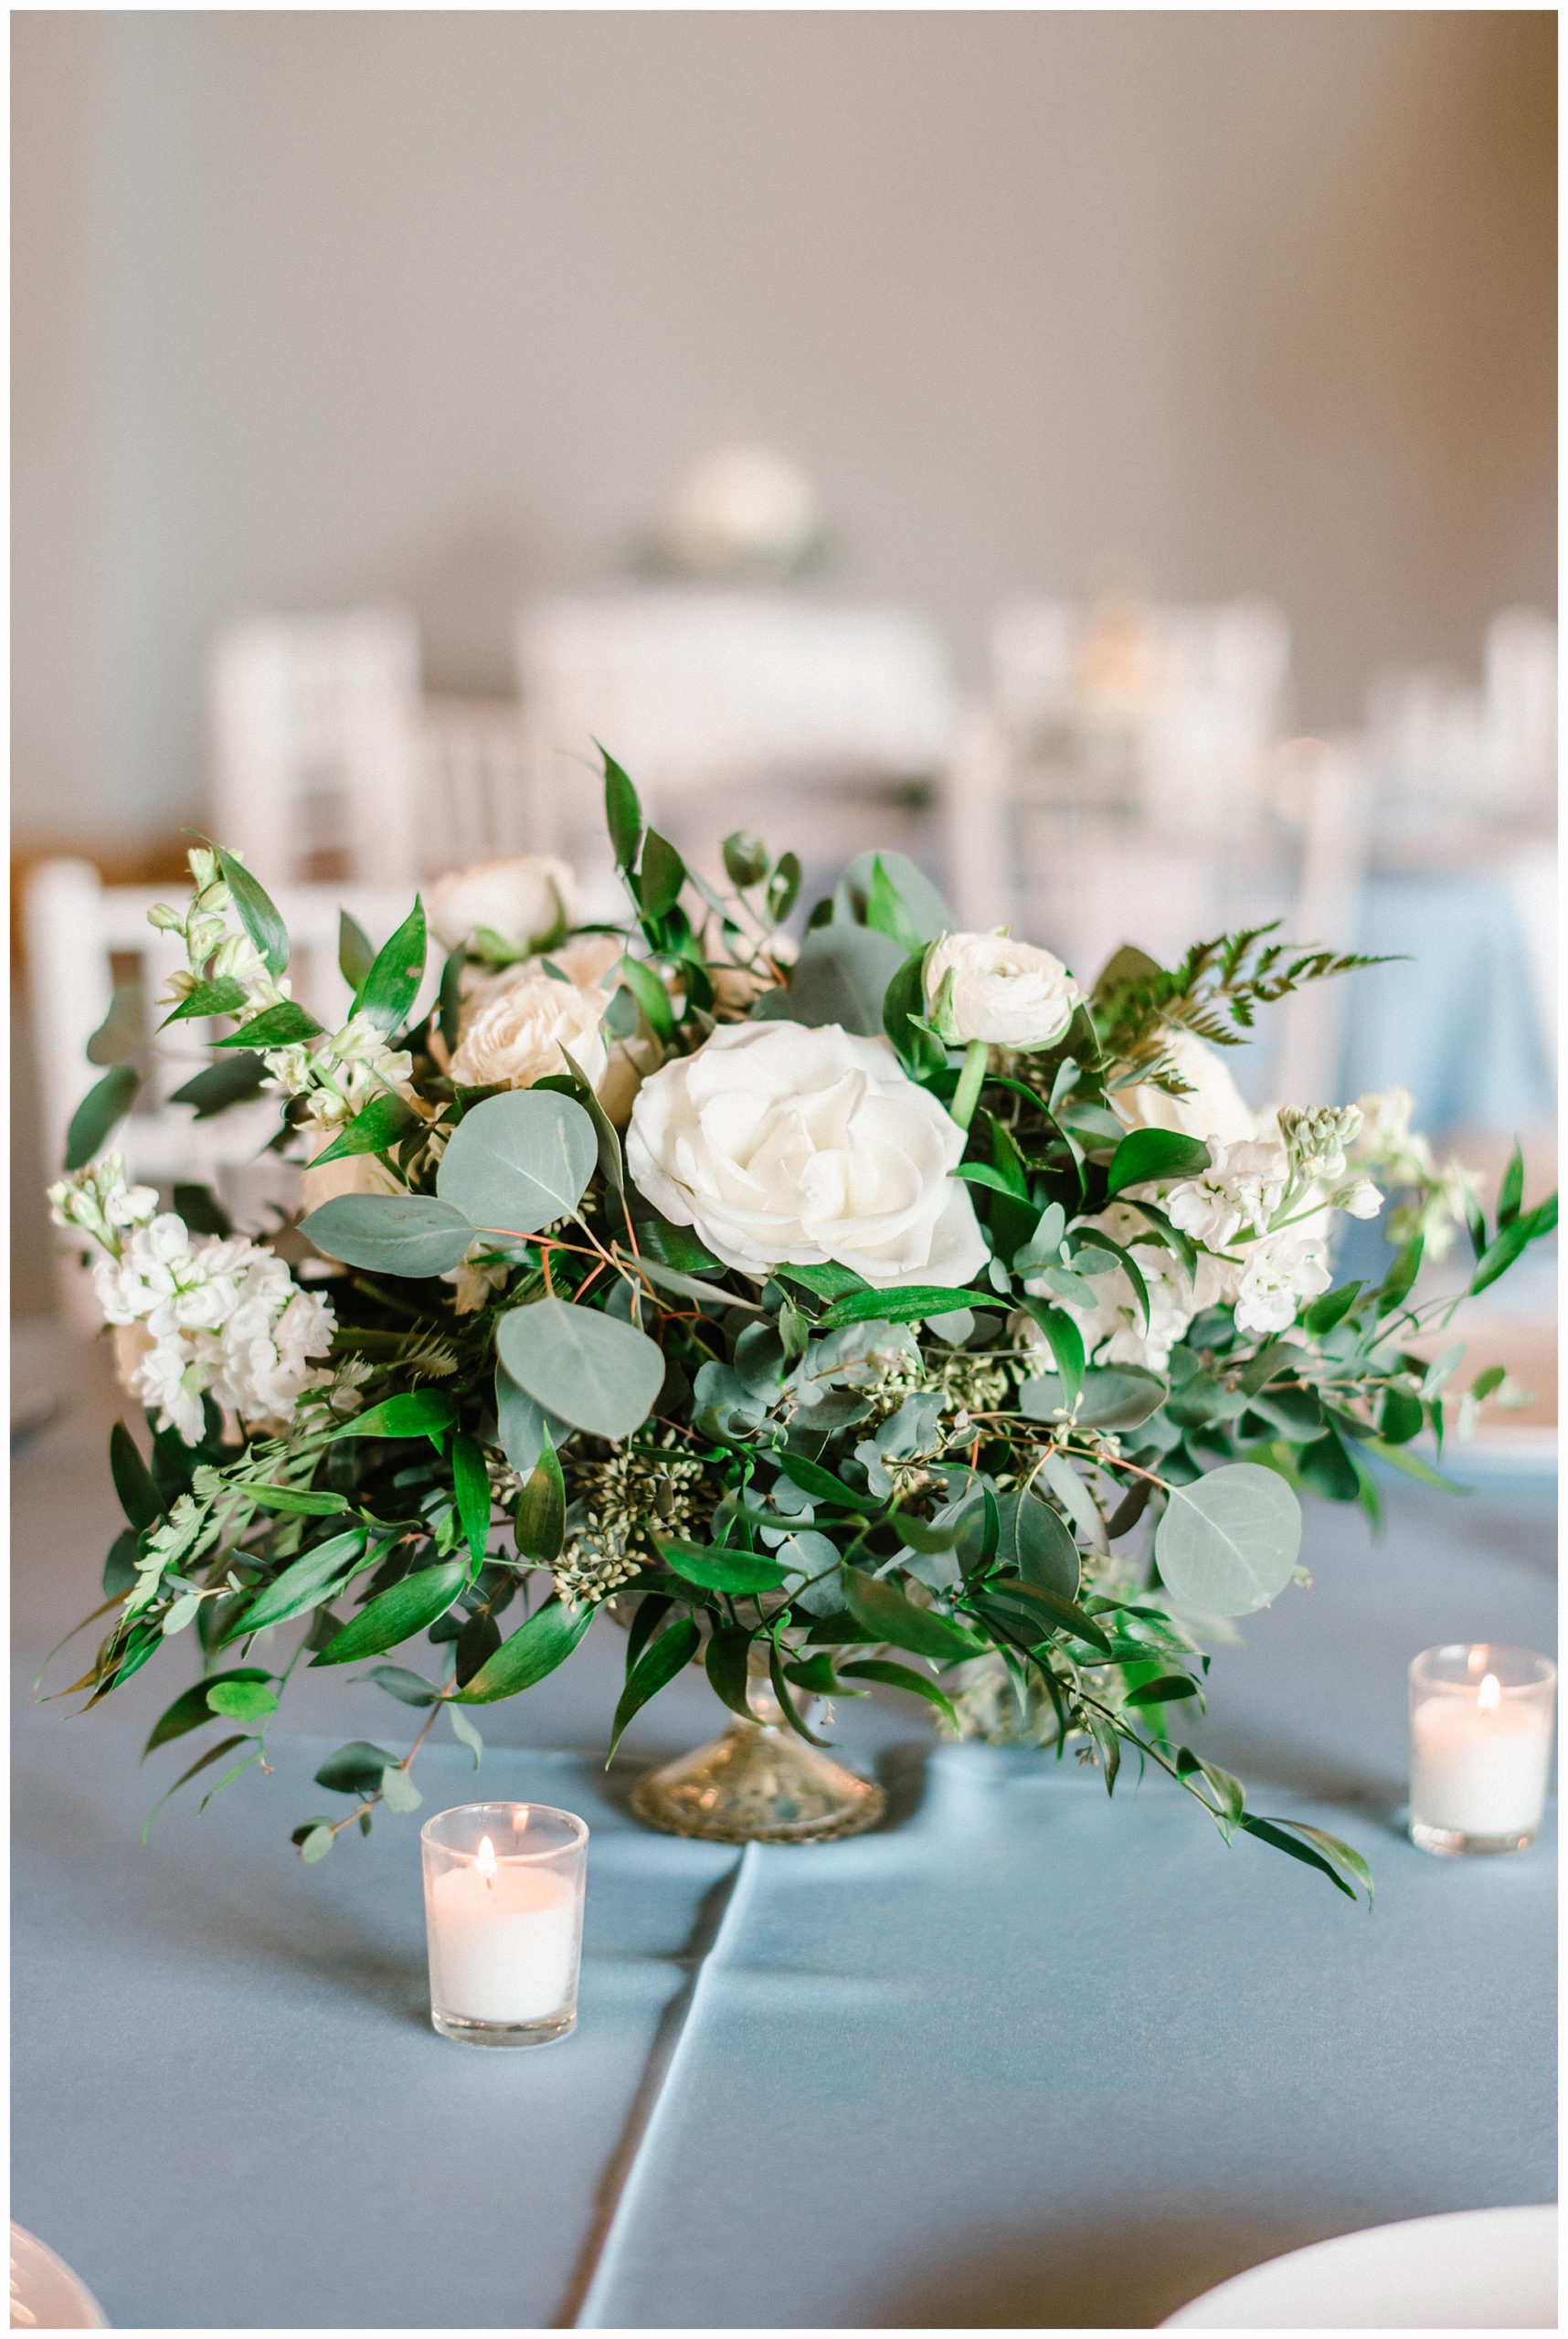 Classic White Rose Centerpieces for Wedding Reception